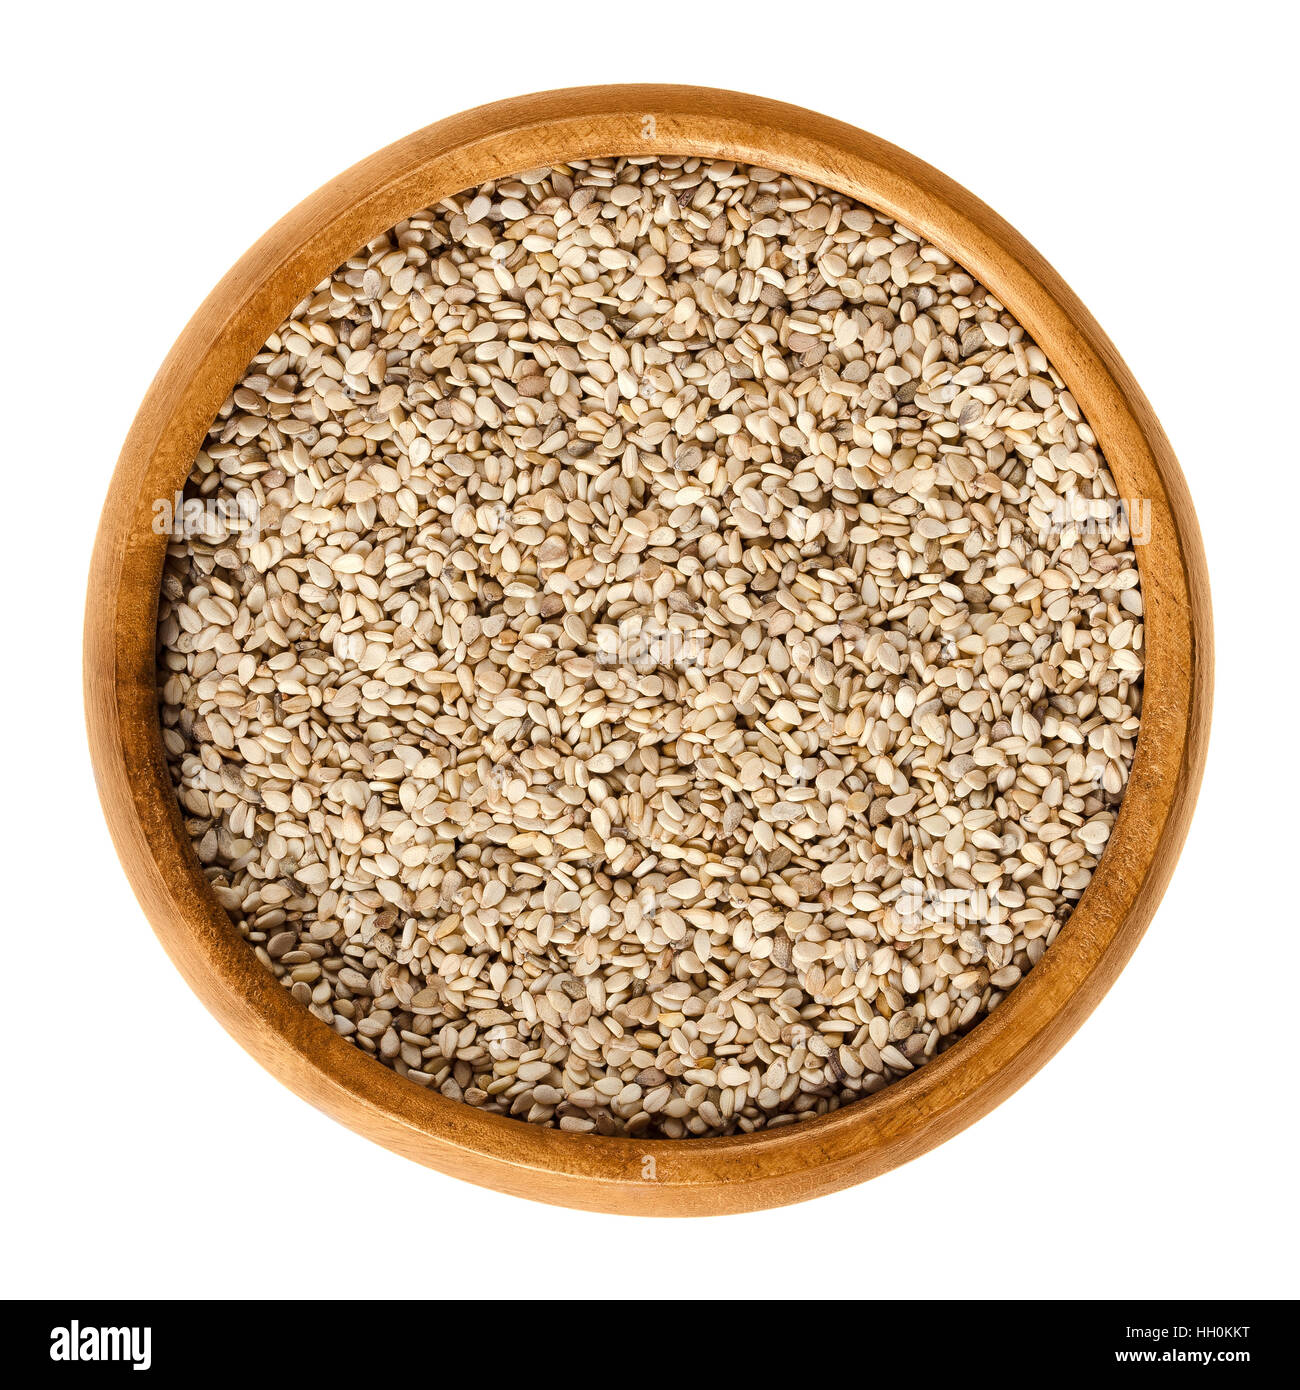 Natural white sesame seeds in wooden bowl. Unpeeled dried fruits of Sesamum, also called benne. Oilseed crops. Isolated macro. Stock Photo